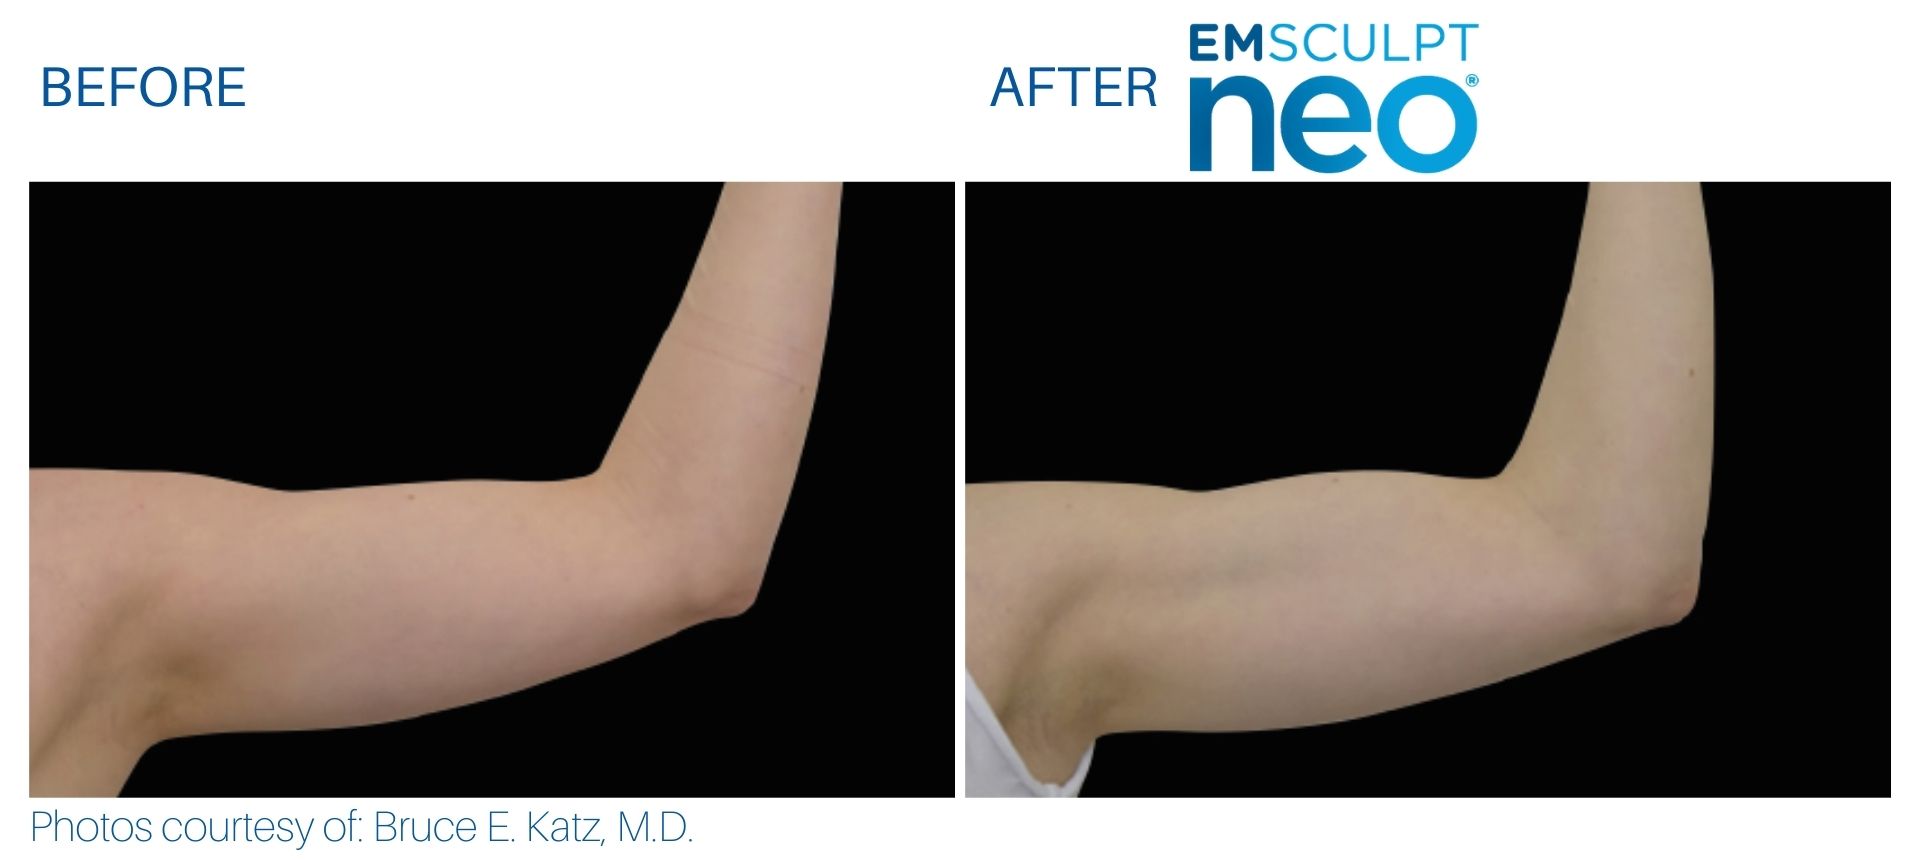 EmSculpt NEO for Muscle Building & Fat Burning Single Session One Area